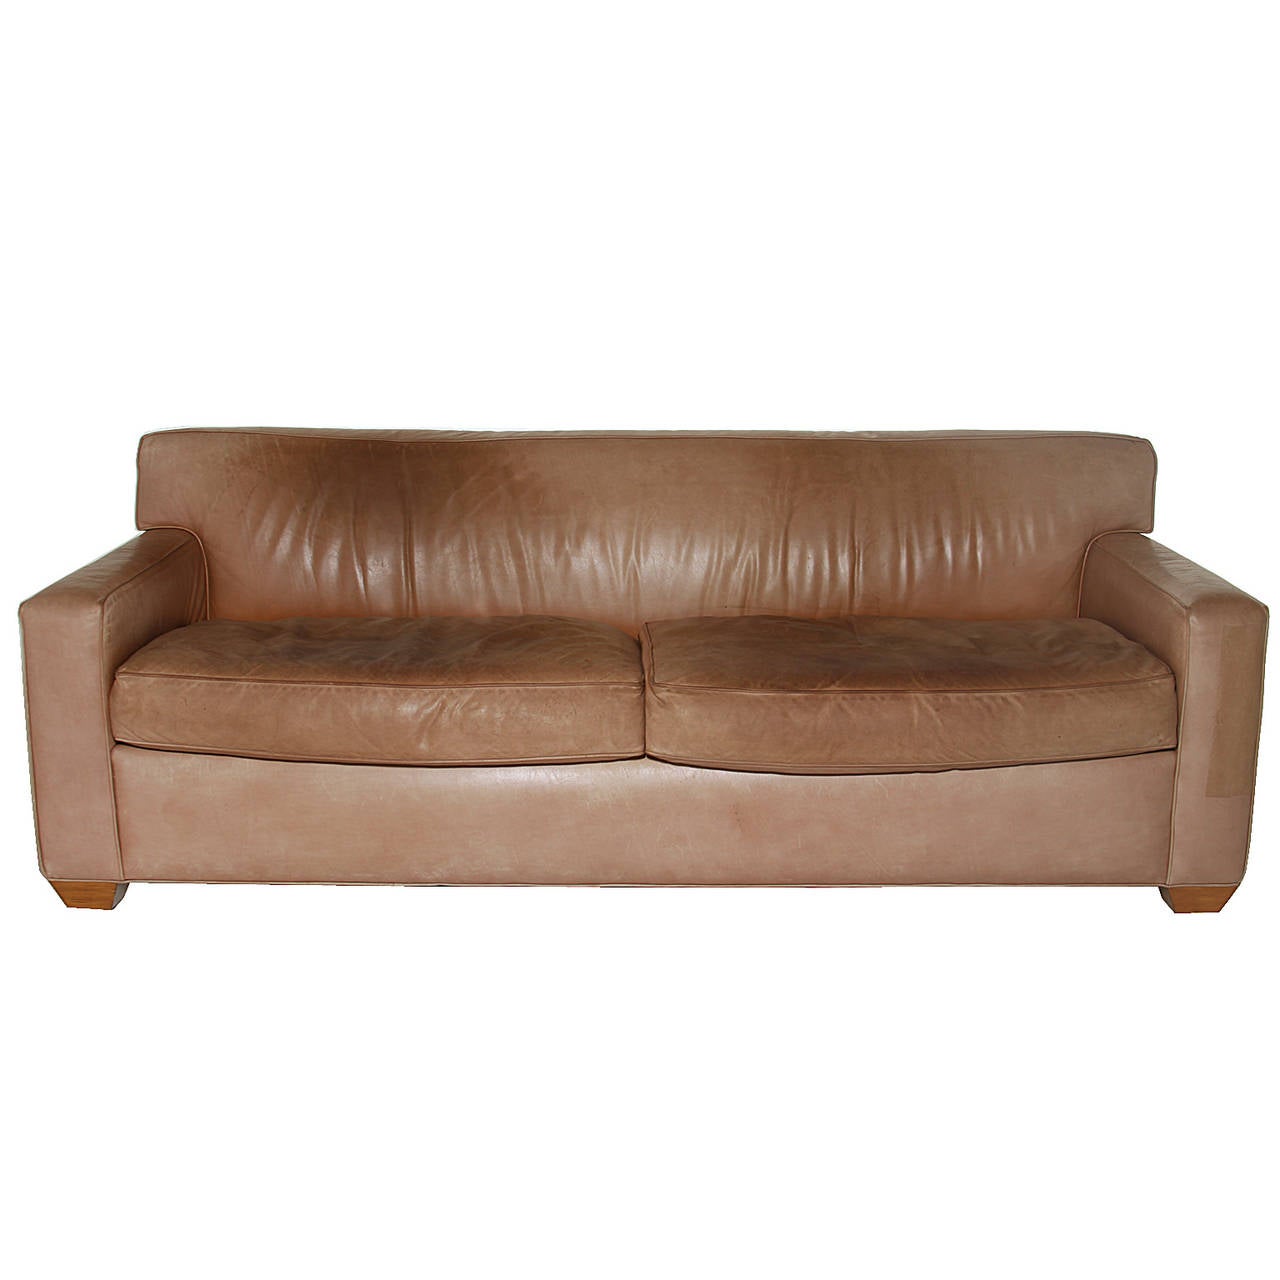 A beautiful Sofa upholstered in original vegetable dyed leather.  It has aged beautifully and has a rich variegation. The leather is a light tan. The legs are prism shaped.

The sofa is in original condition and has minor wear as seen in photos.